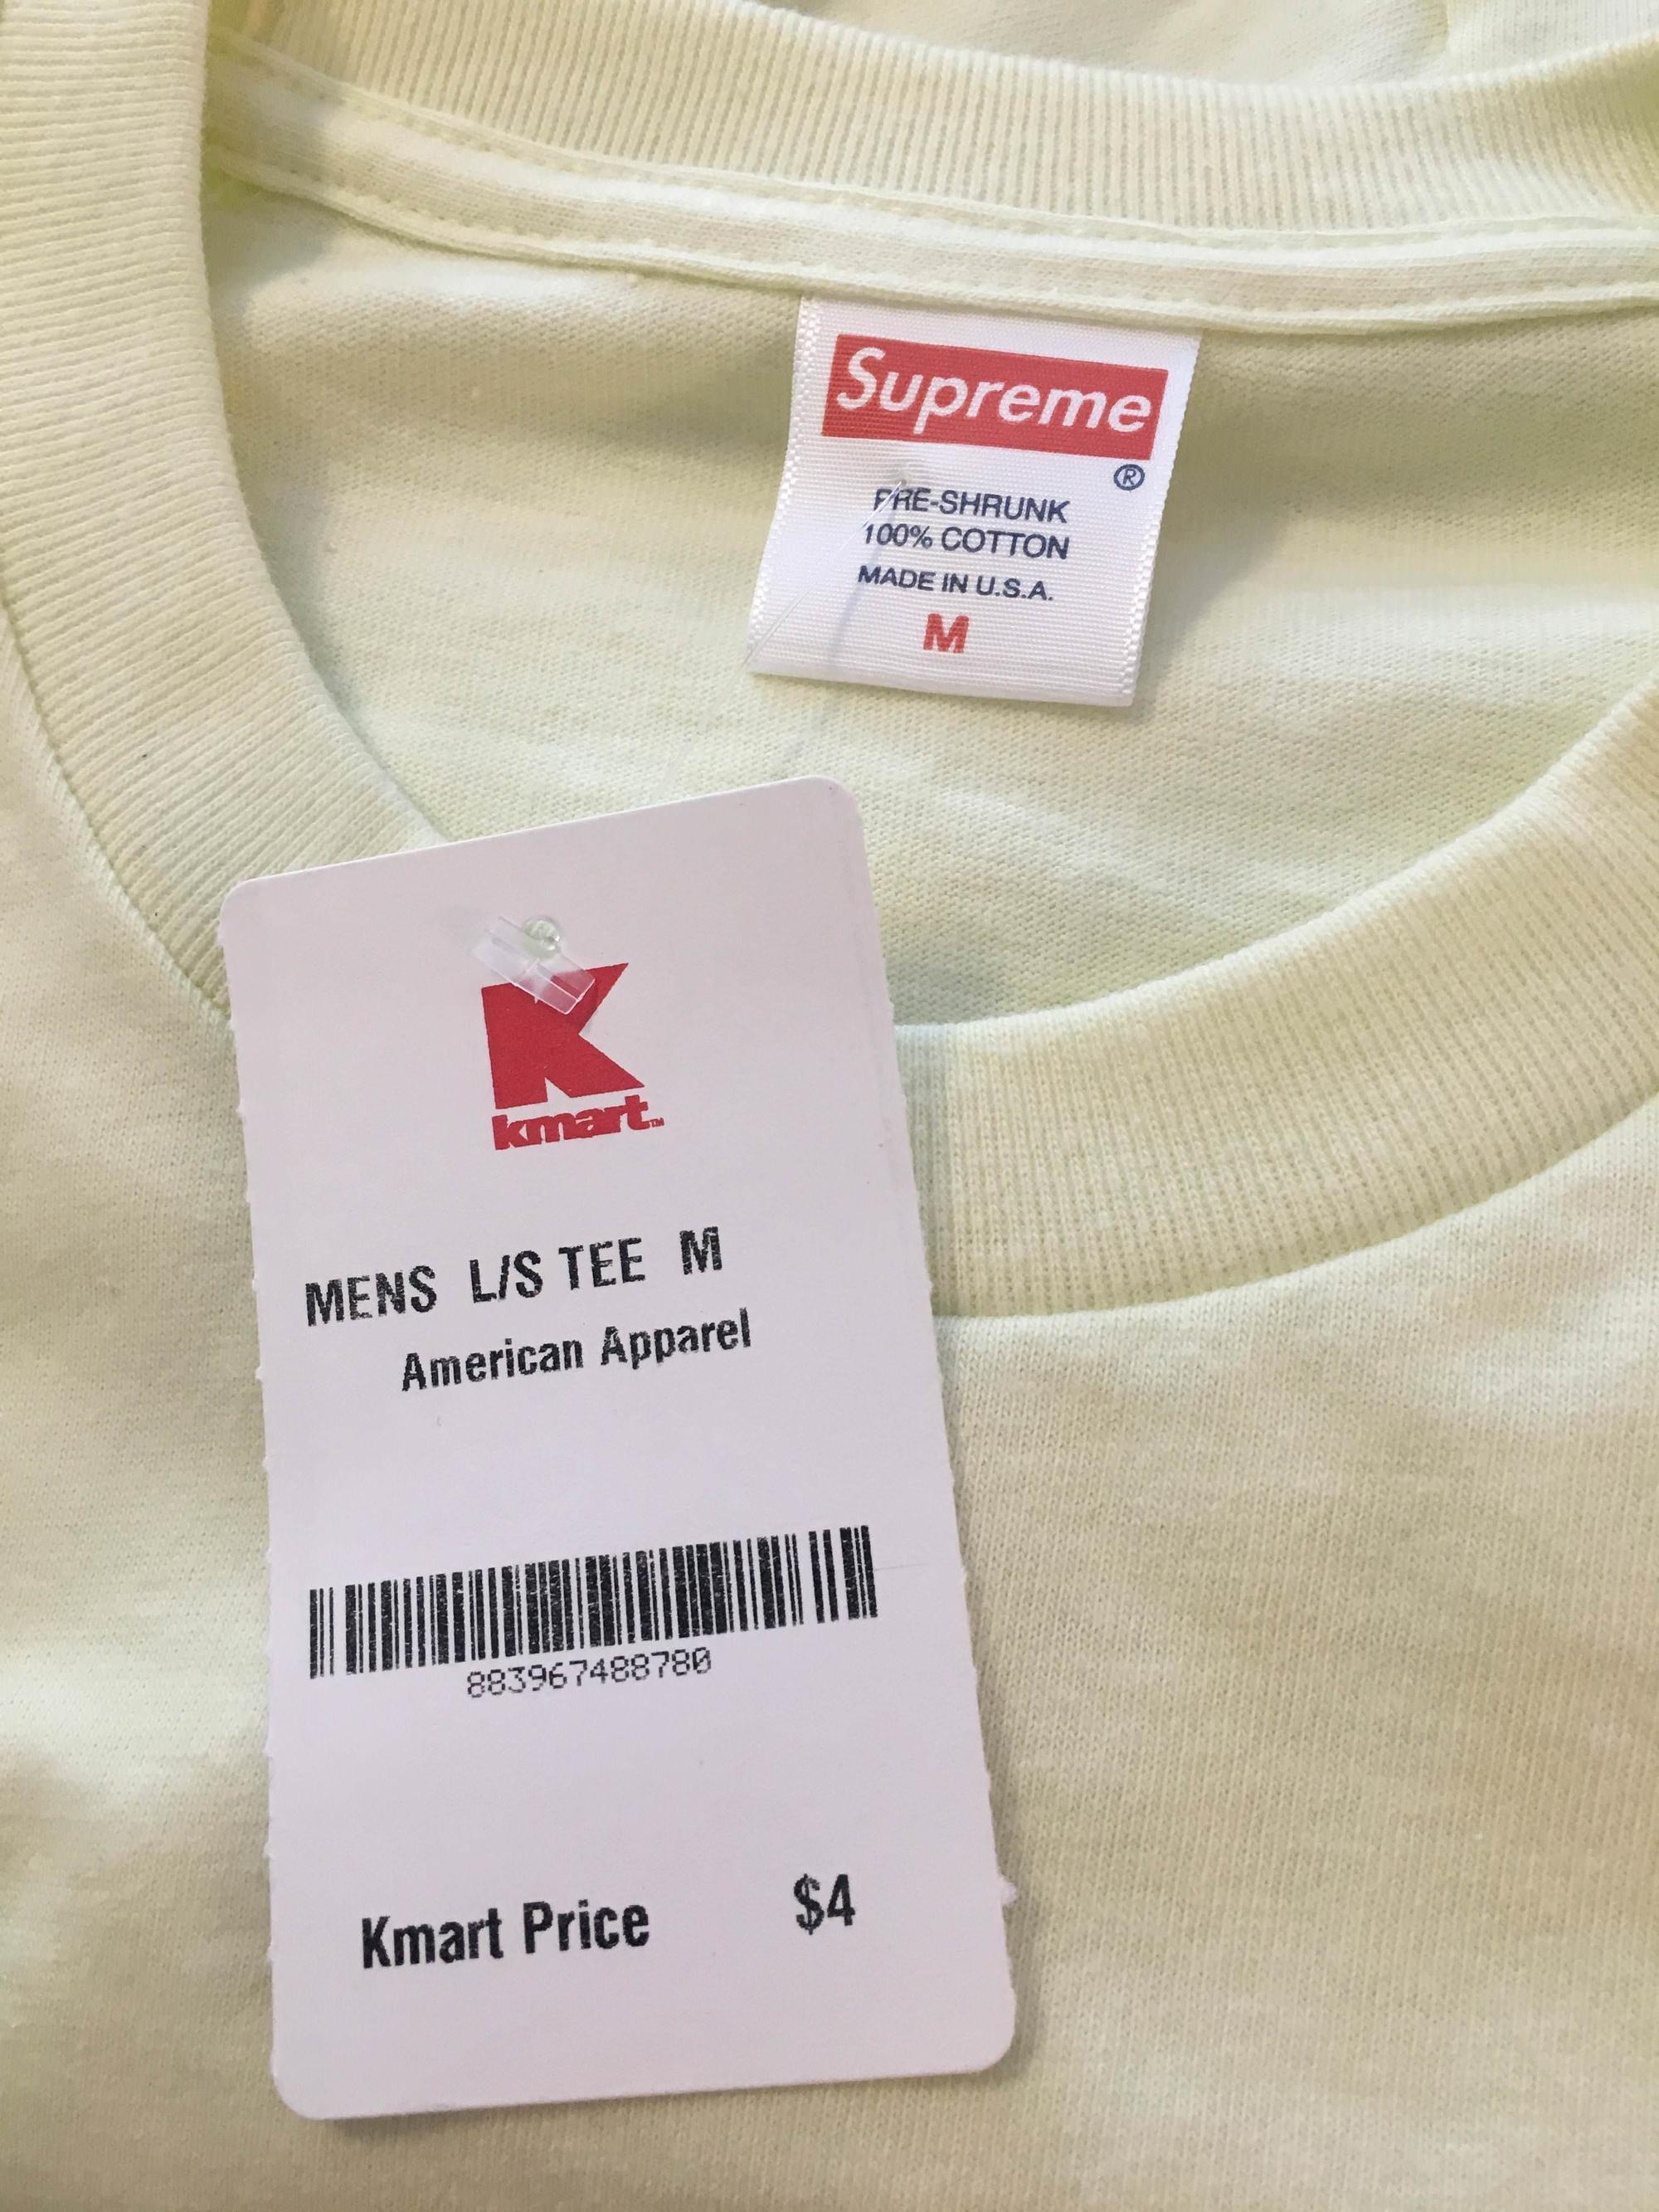 idaho-teenage-lucks-out-finds-4-supreme-tees-in-his-local-k-mart-body-image-1501472159